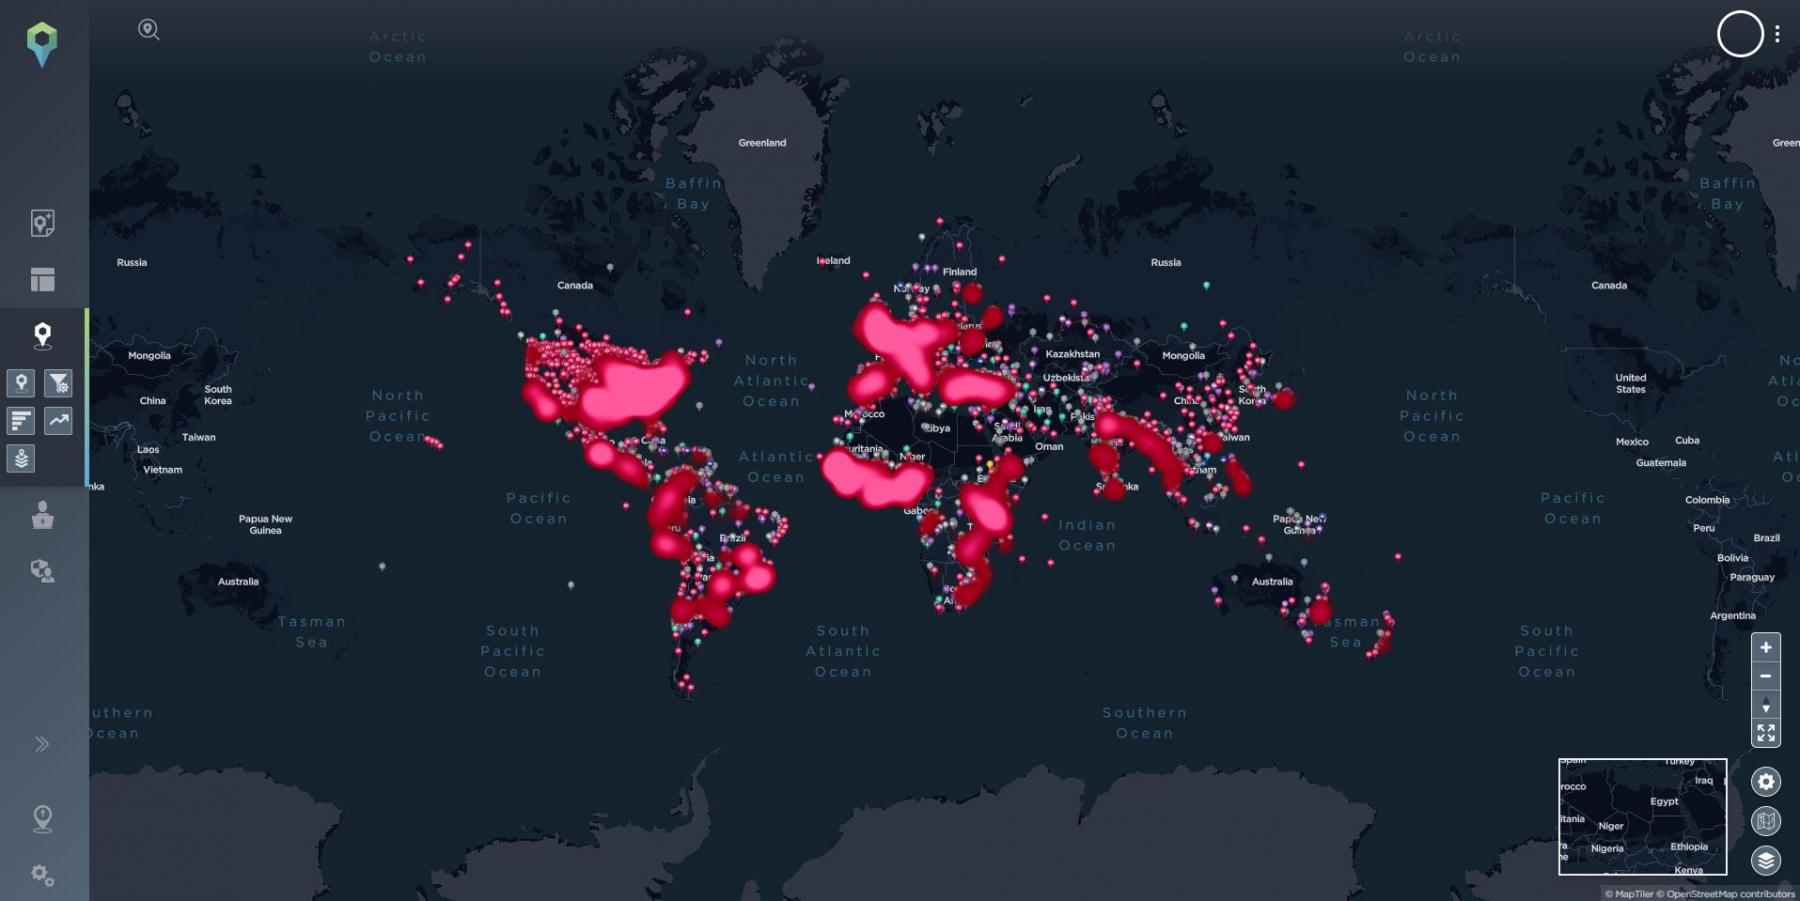 A heatmap showing the concentration of coronavirus-related incidents across the globe